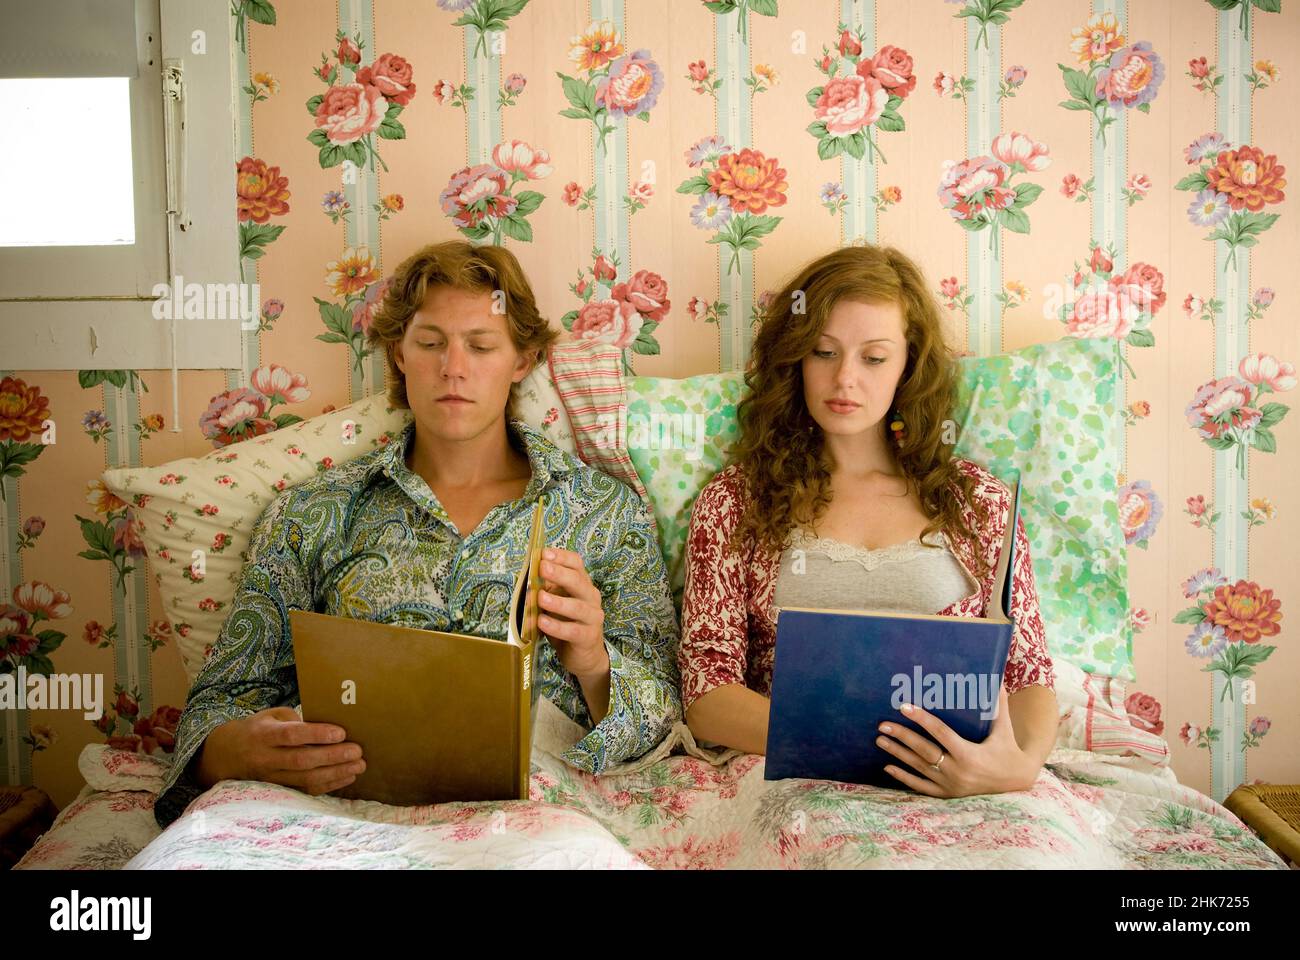 Young couple laying in bed reading books in bedroom with floral wallpaper walls Stock Photo